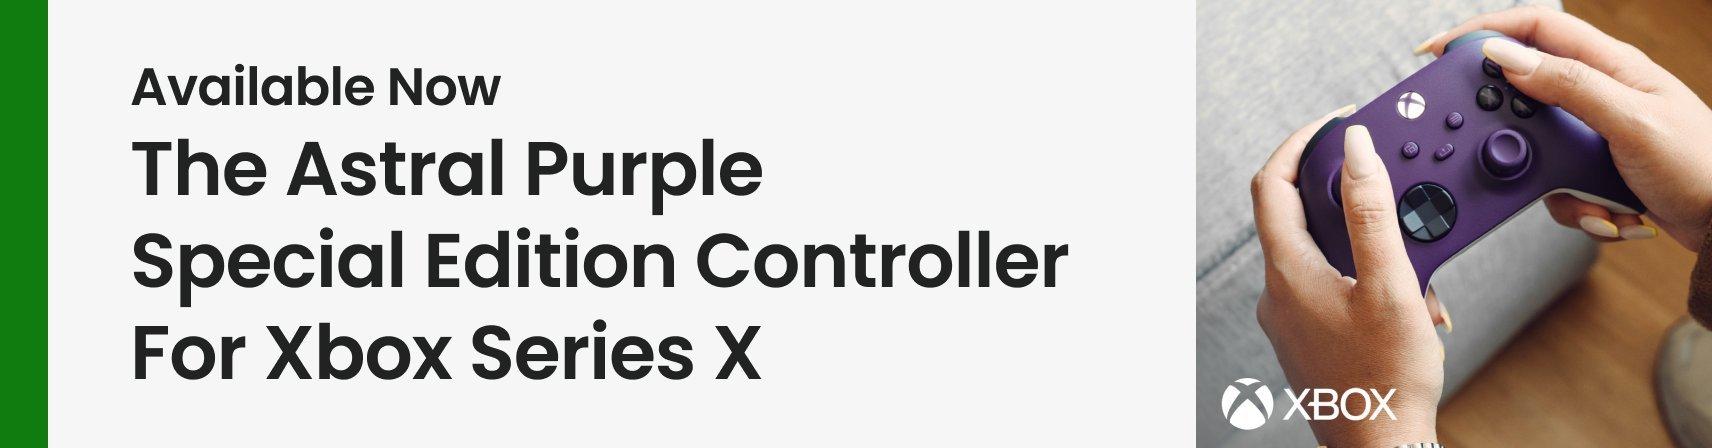 Astral Purple Controller